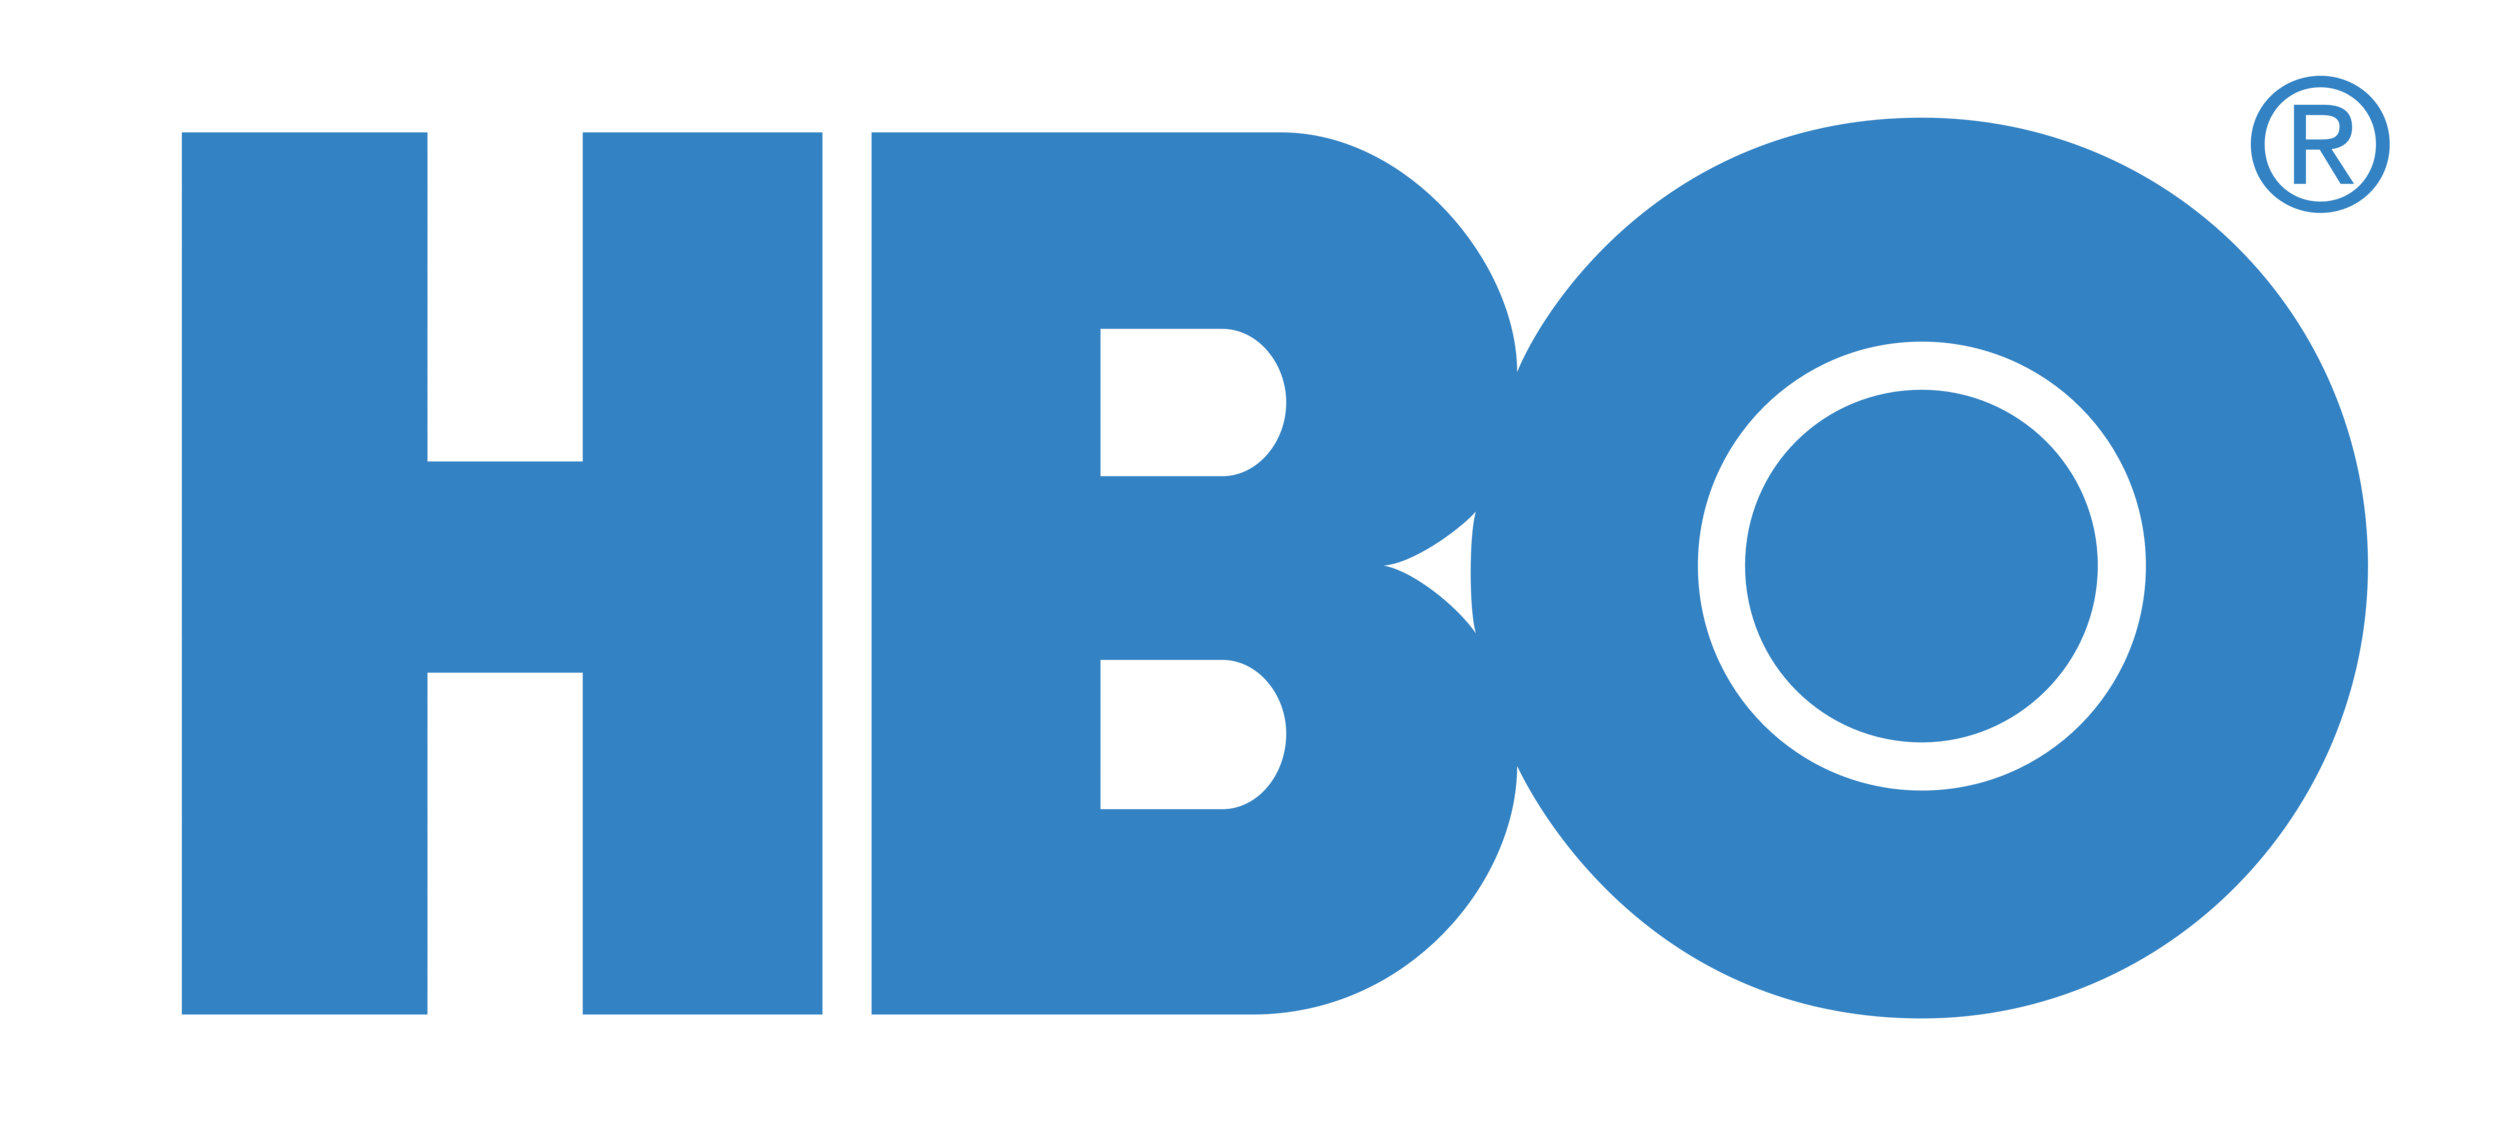 HBO.png